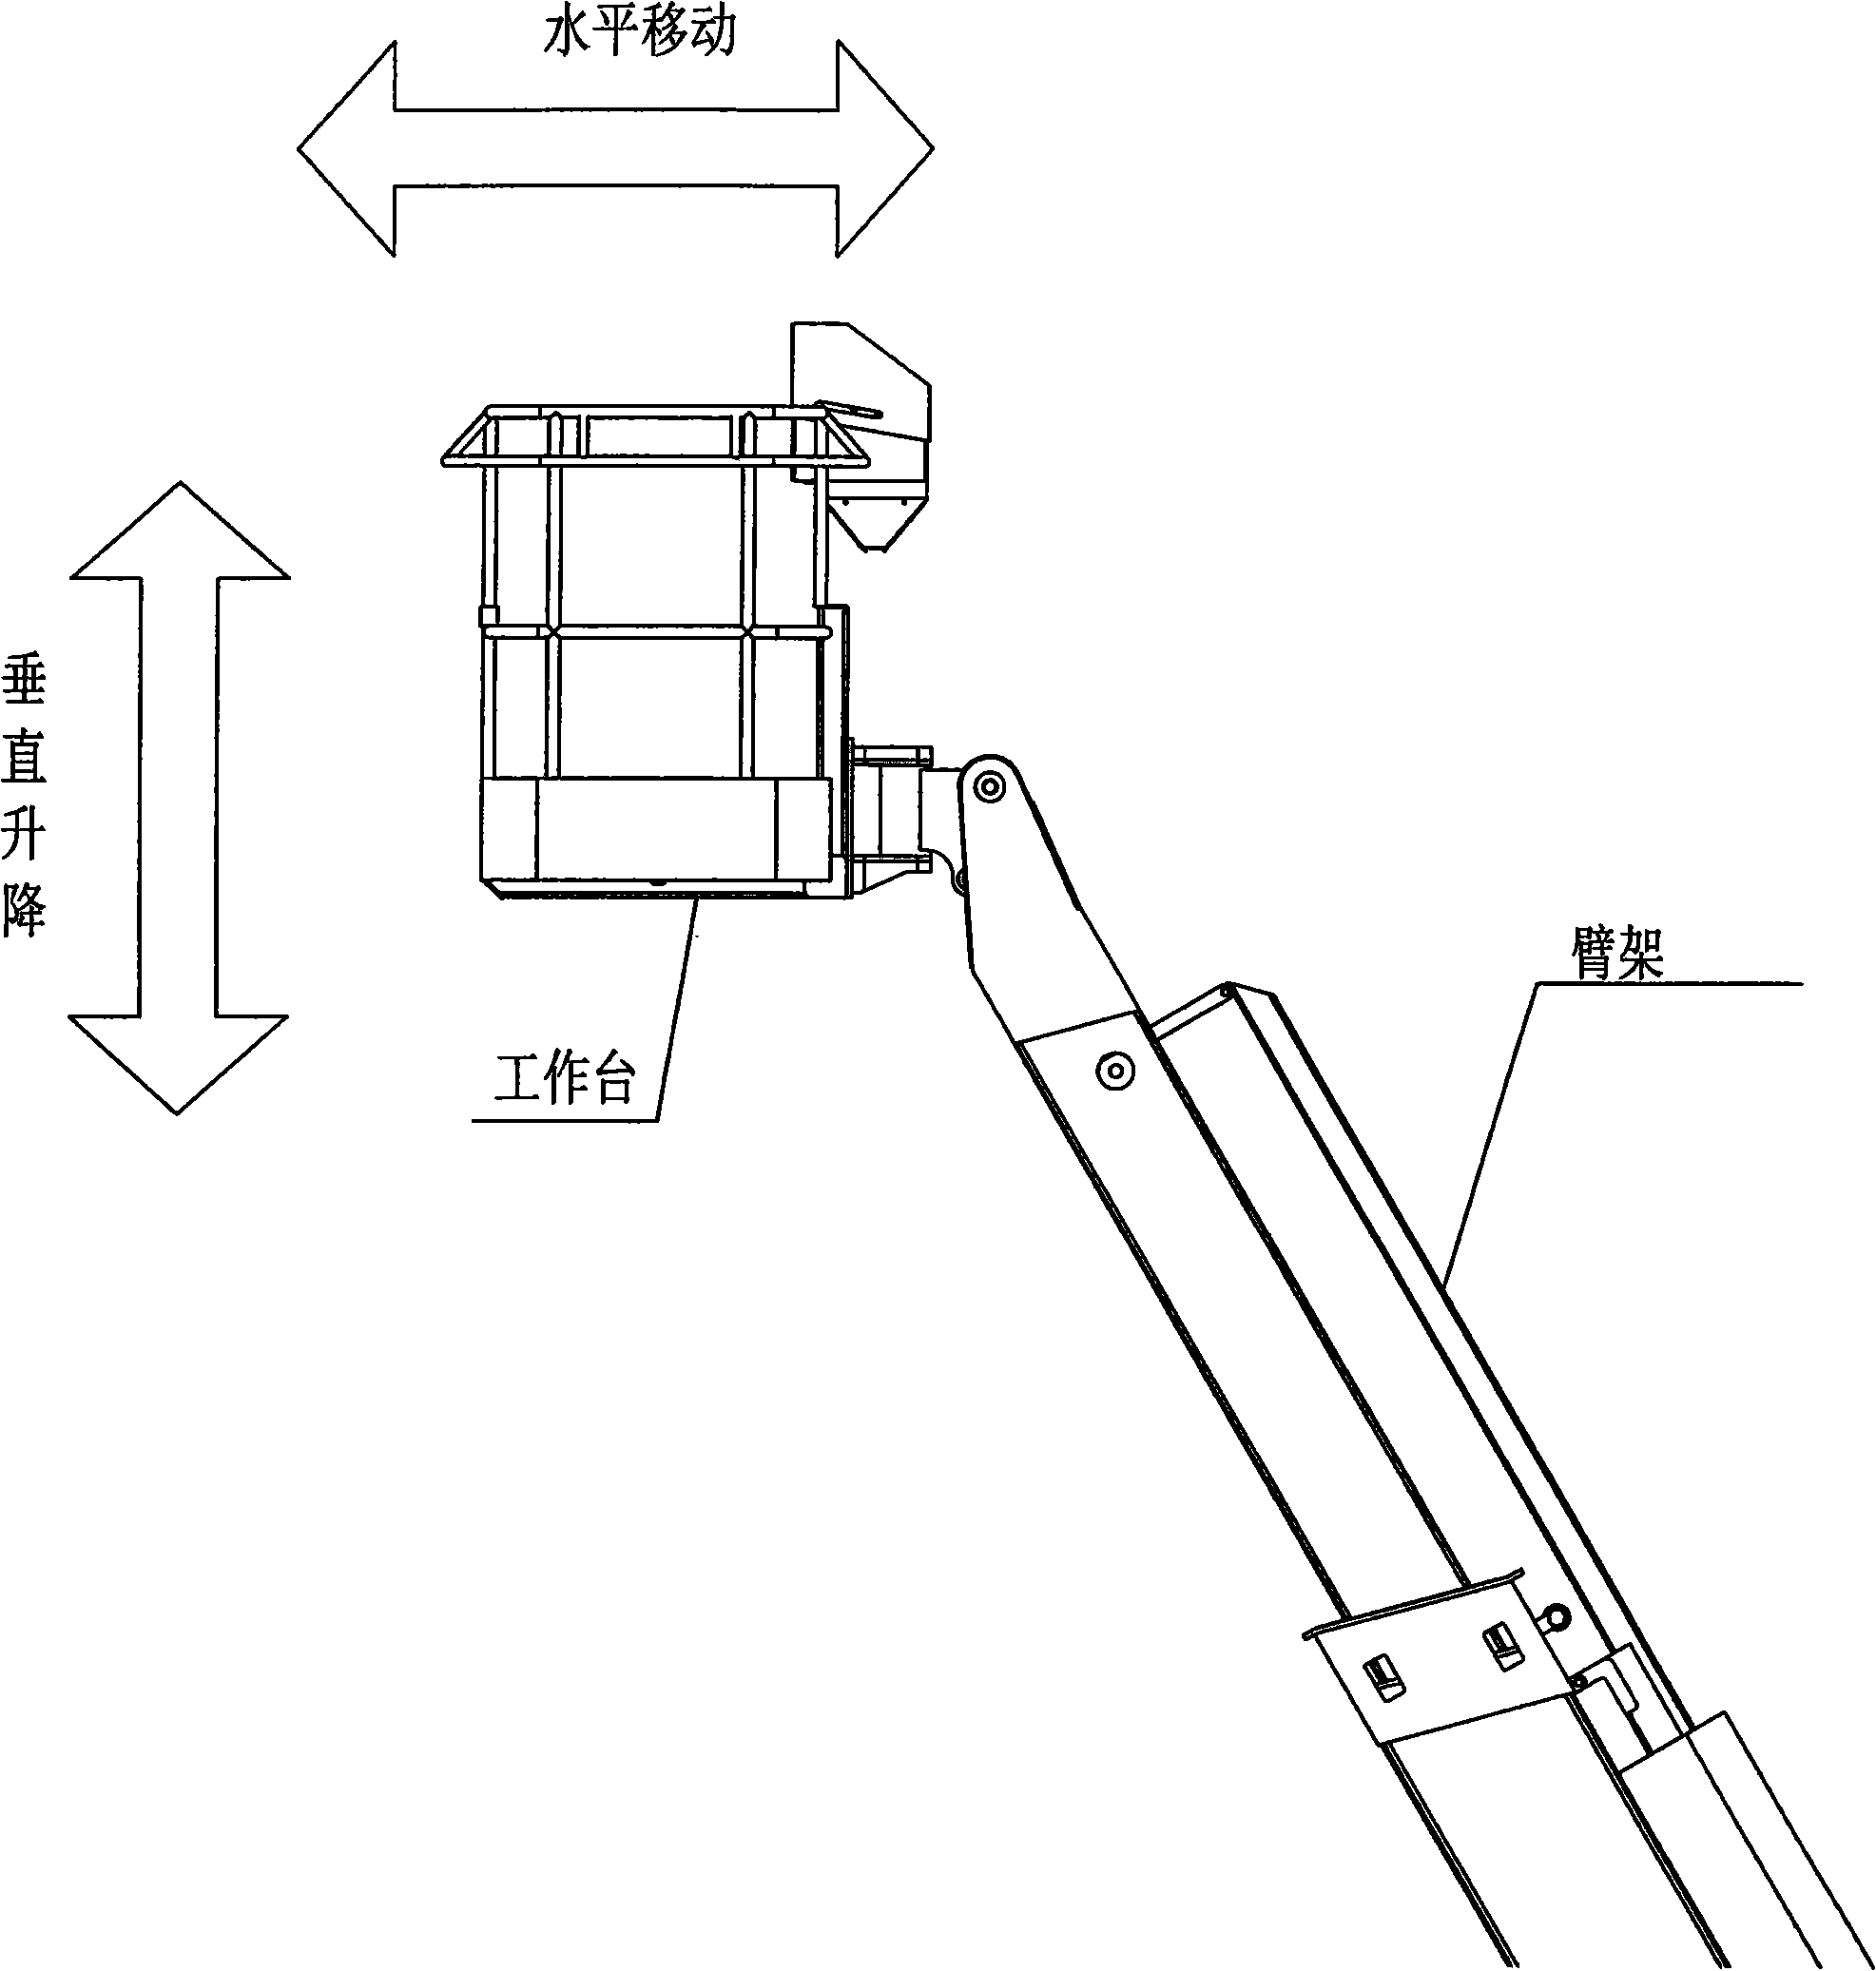 Method for controlling vertical lift and horizontal movement of working cab of aerial work platform